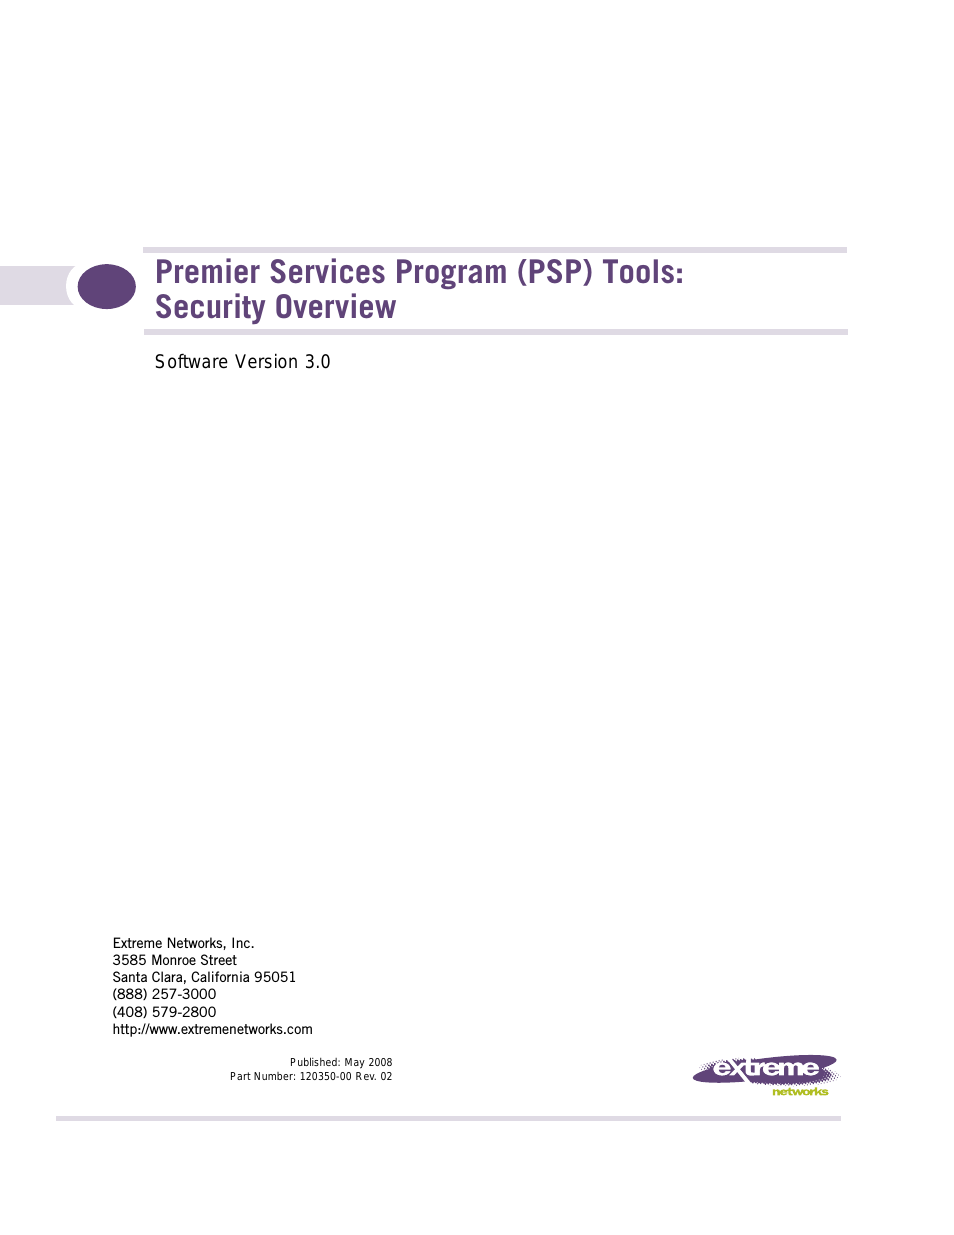 SECURITY OVERVIEW 120350-00